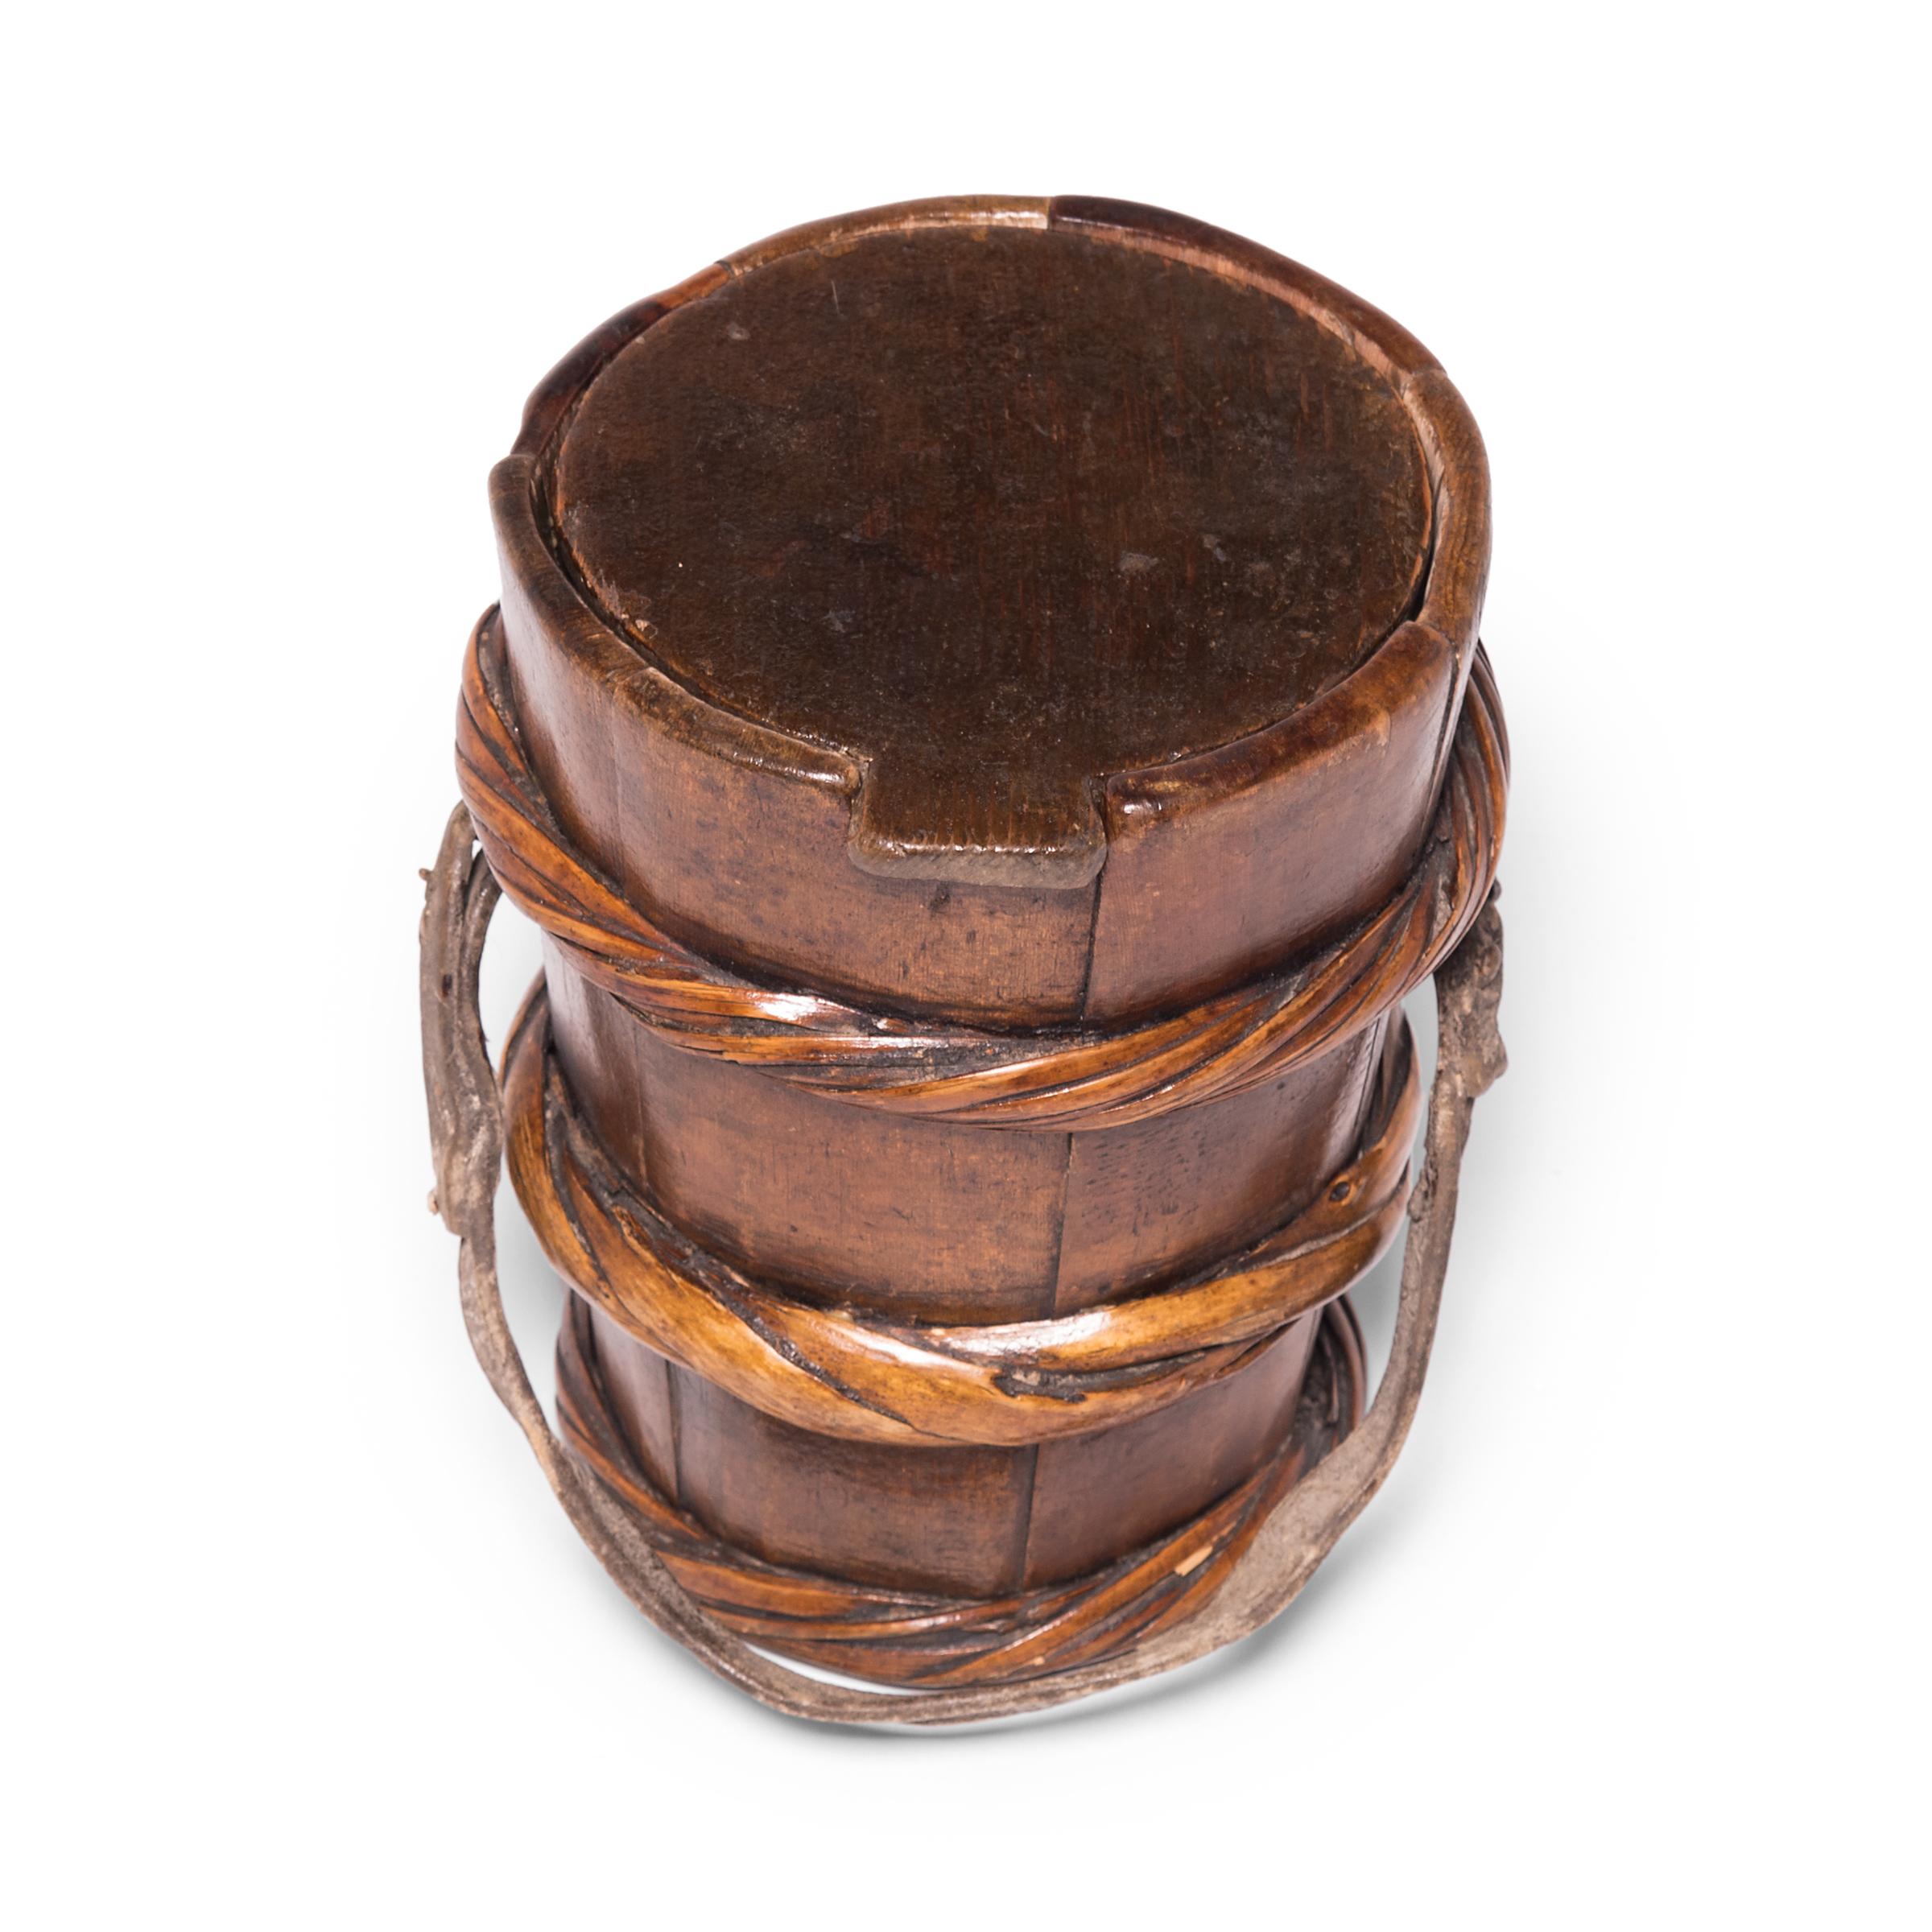 This beautifully-aged wooden container dates to the late 19th century and was used to transport and store a nutritious butter made from yak’s milk. Food was scarce on the Mongolian steppes and had to be carefully rationed so that nothing was wasted.